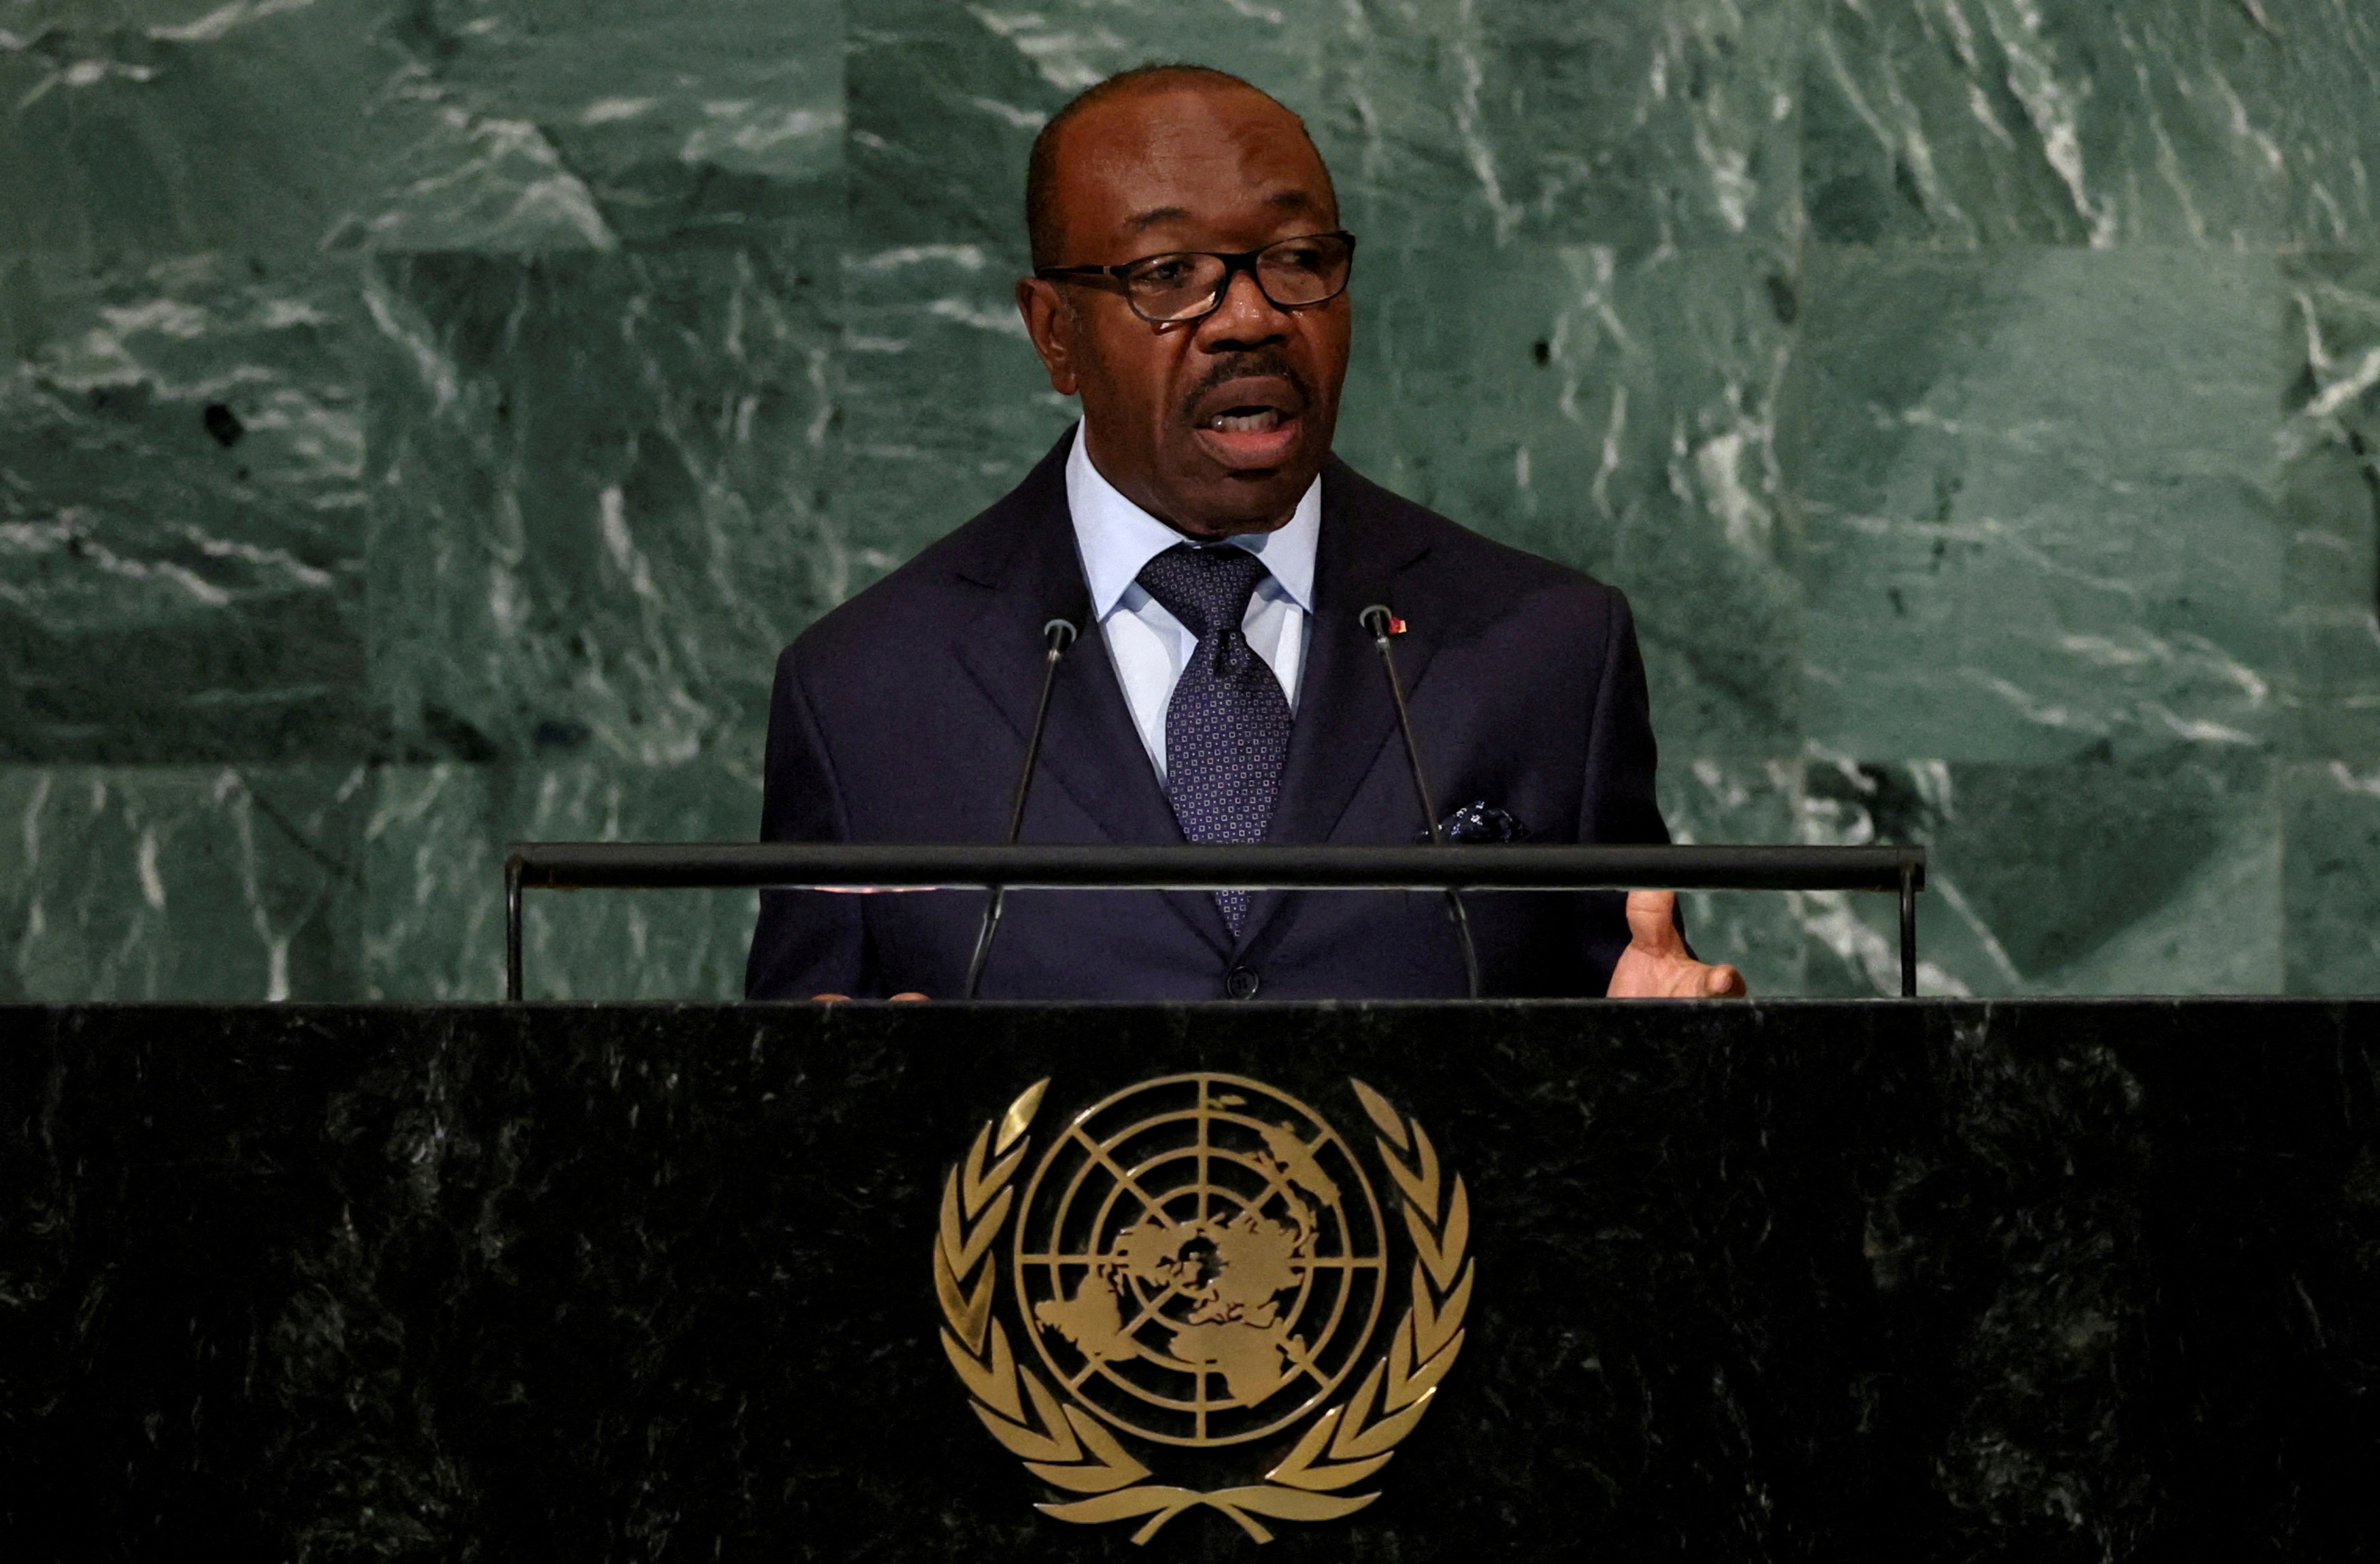 FILE PHOTO: Gabon's President address the 77th Session of the United Nations General Assembly at U.N. Headquarters in New York City